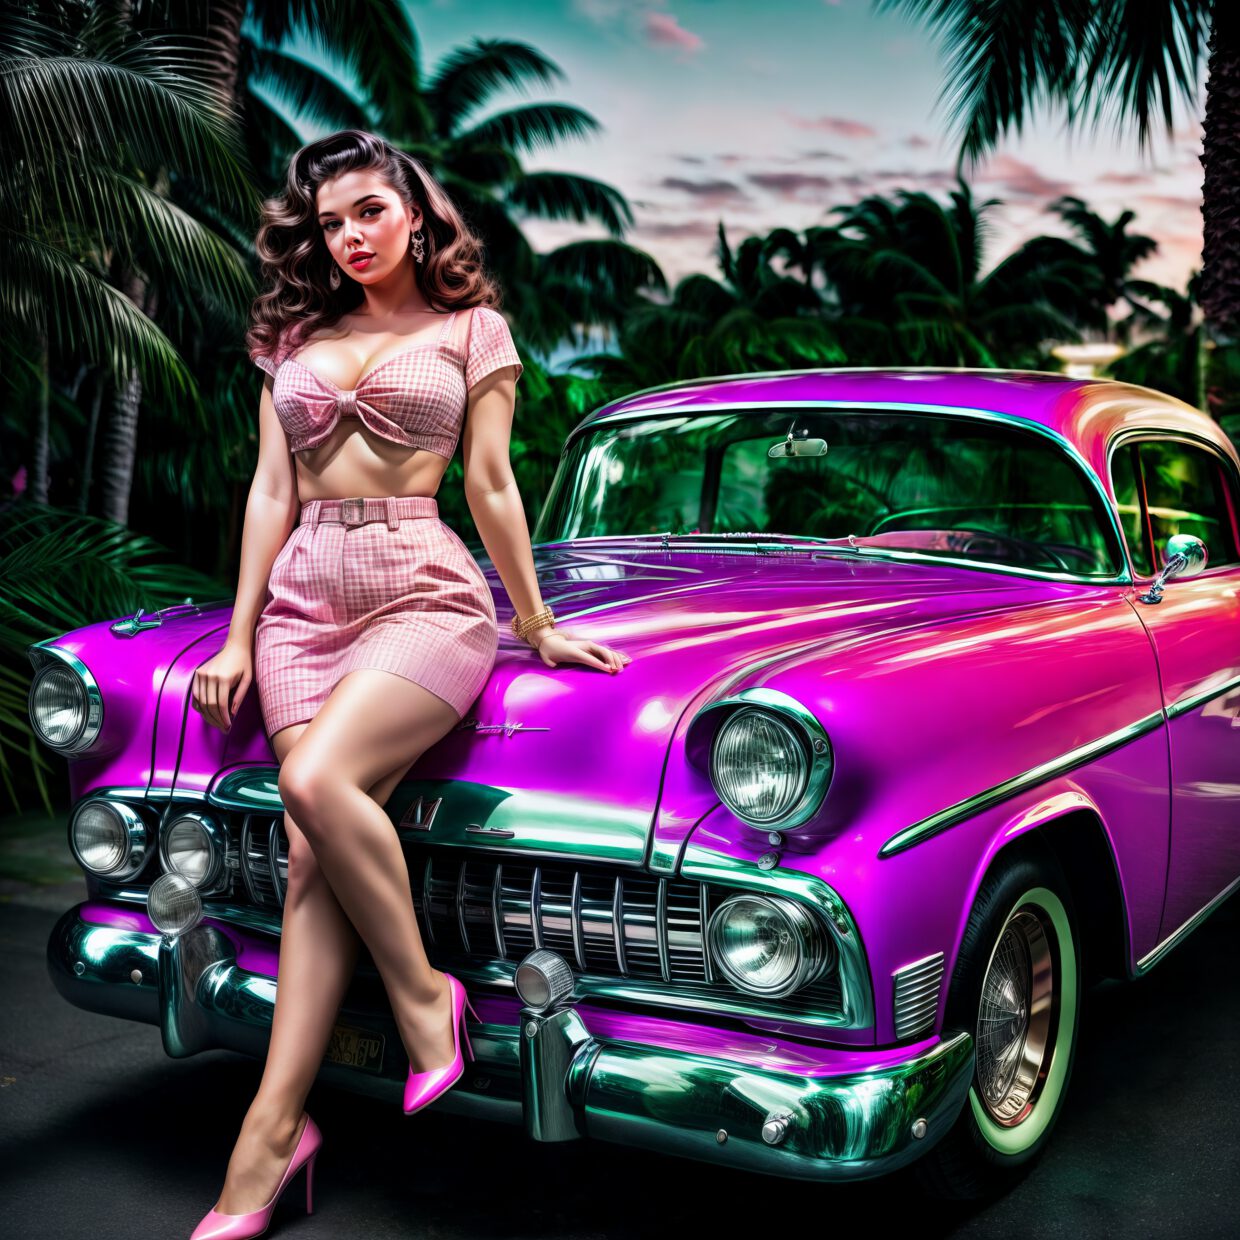 3Daizy, in a retro rockabilly outfit, leaning against a pink classic car in a tropical setting.